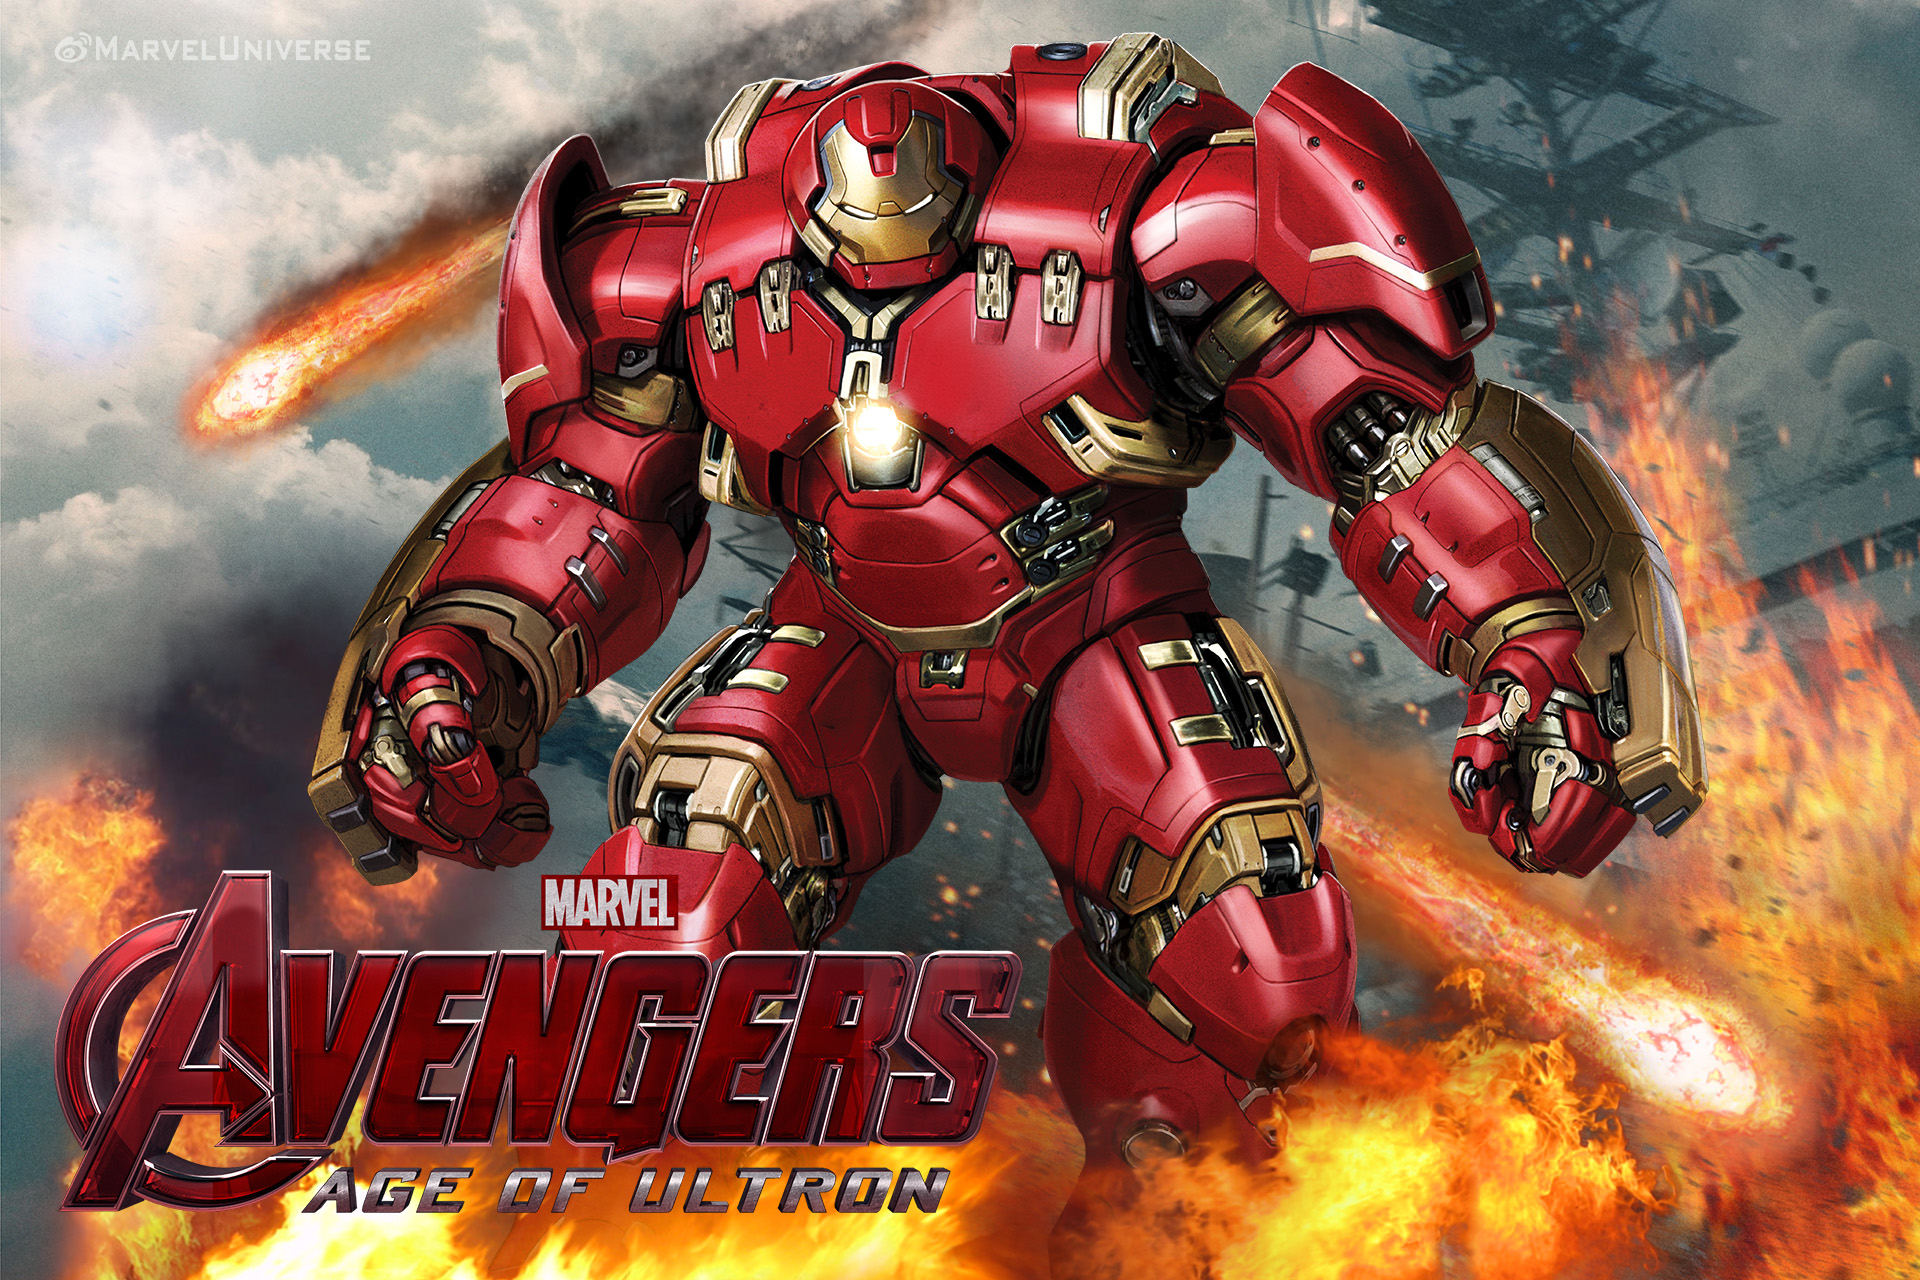 Age Of Ultron Iron Man Hulk Buster By Chenshijie9095